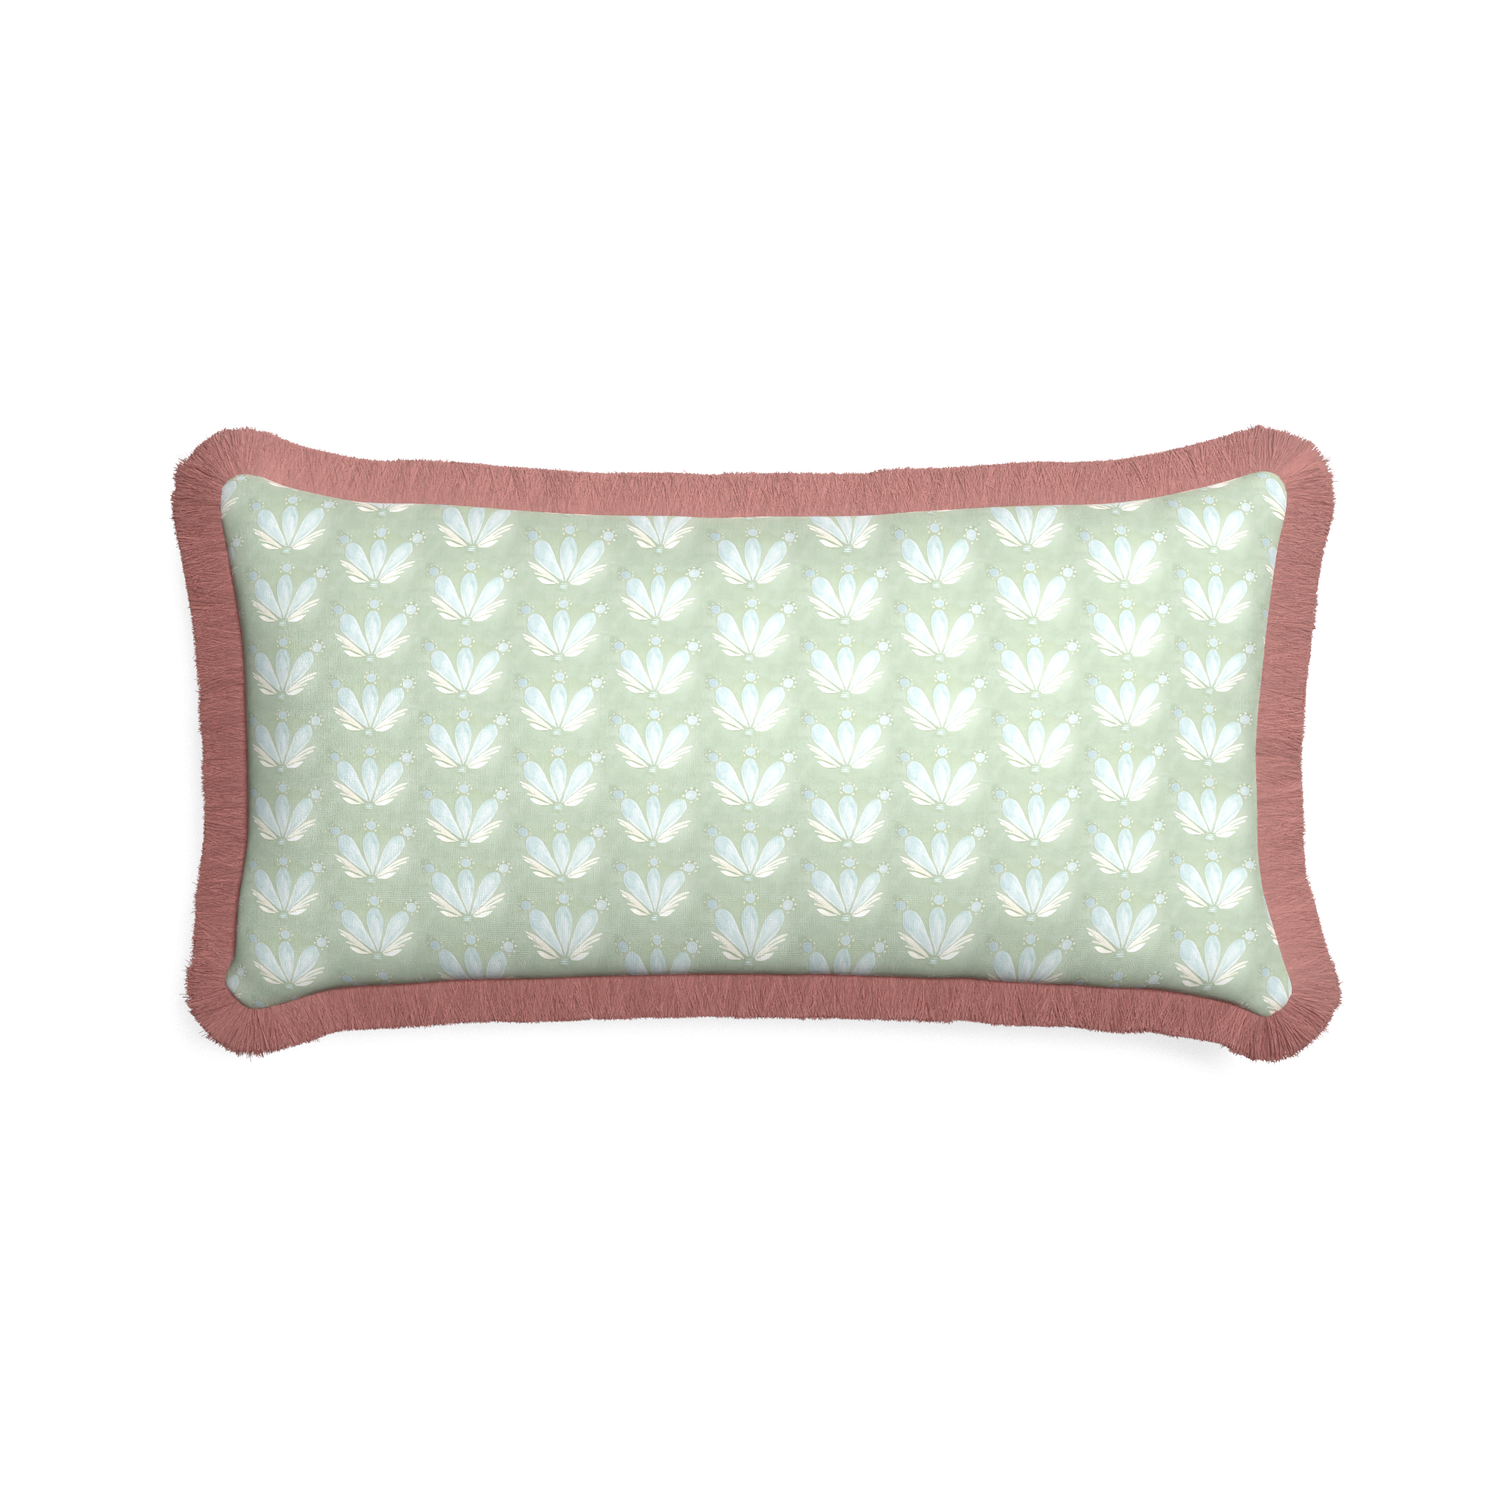 Midi-lumbar serena sea salt custom blue & green floral drop repeatpillow with d fringe on white background